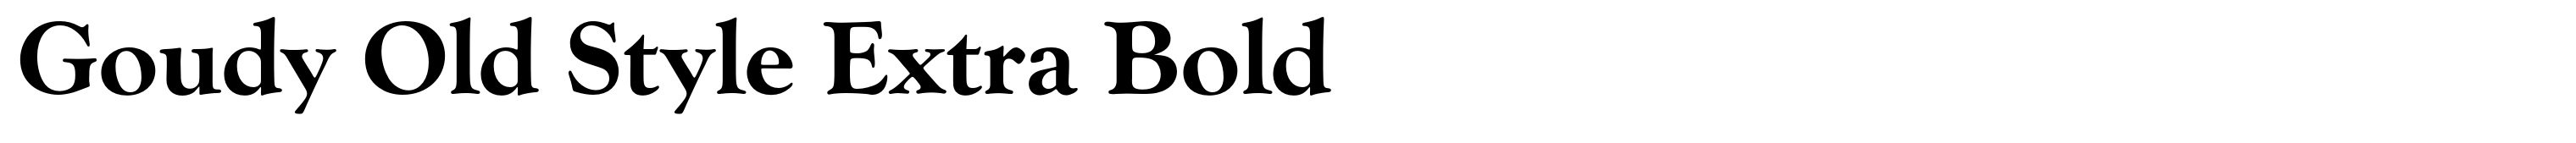 Goudy Old Style Extra Bold